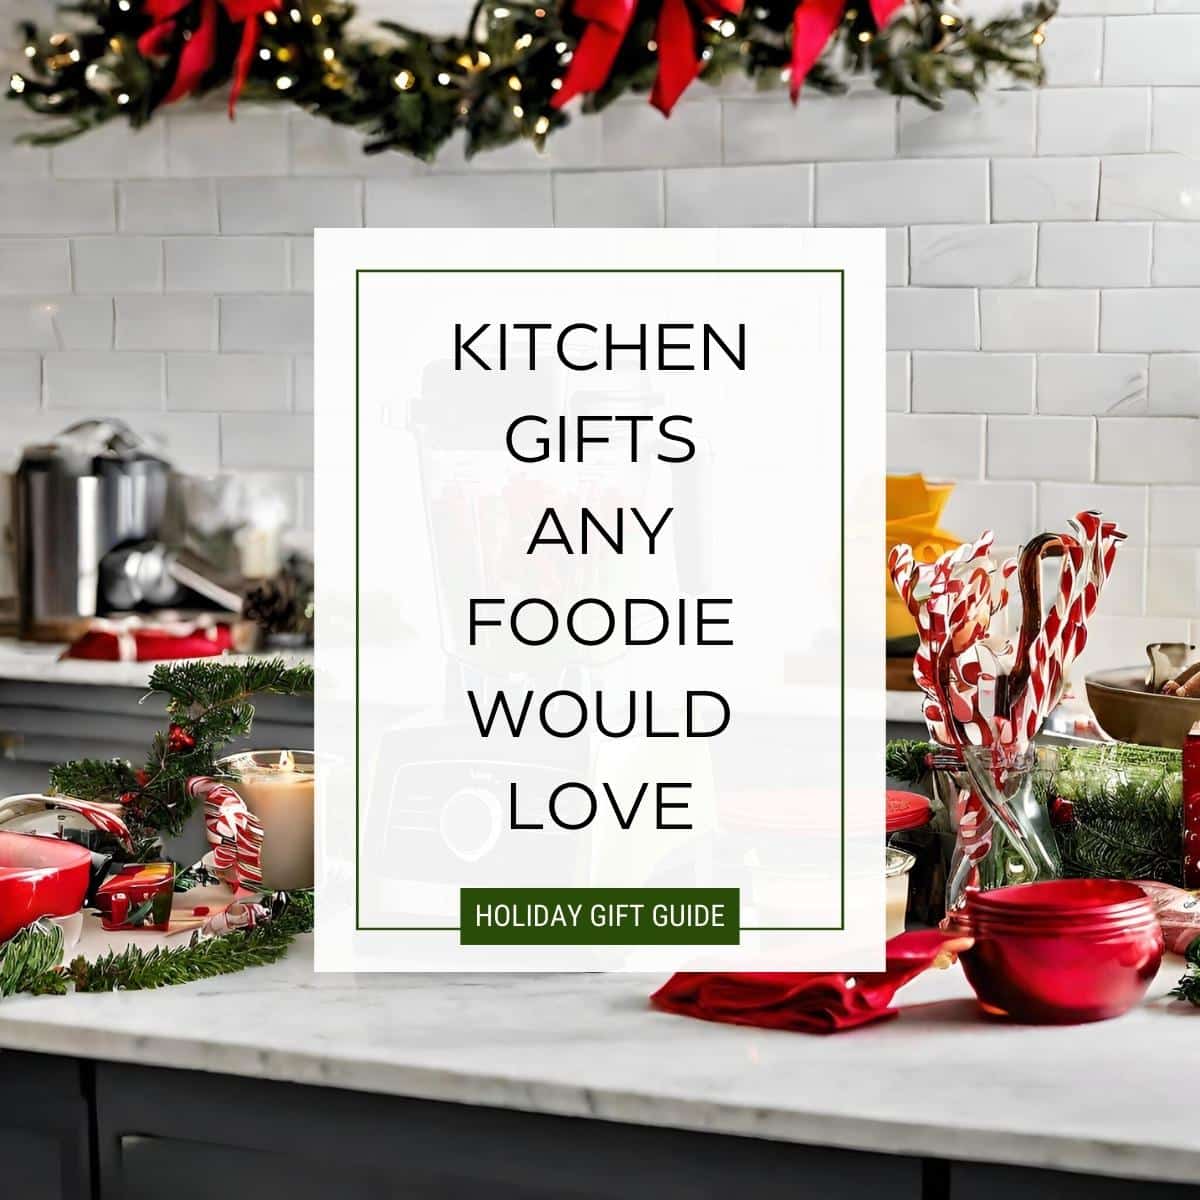 Best Healthy Food and Cooking Gifts - Cook Eat Well